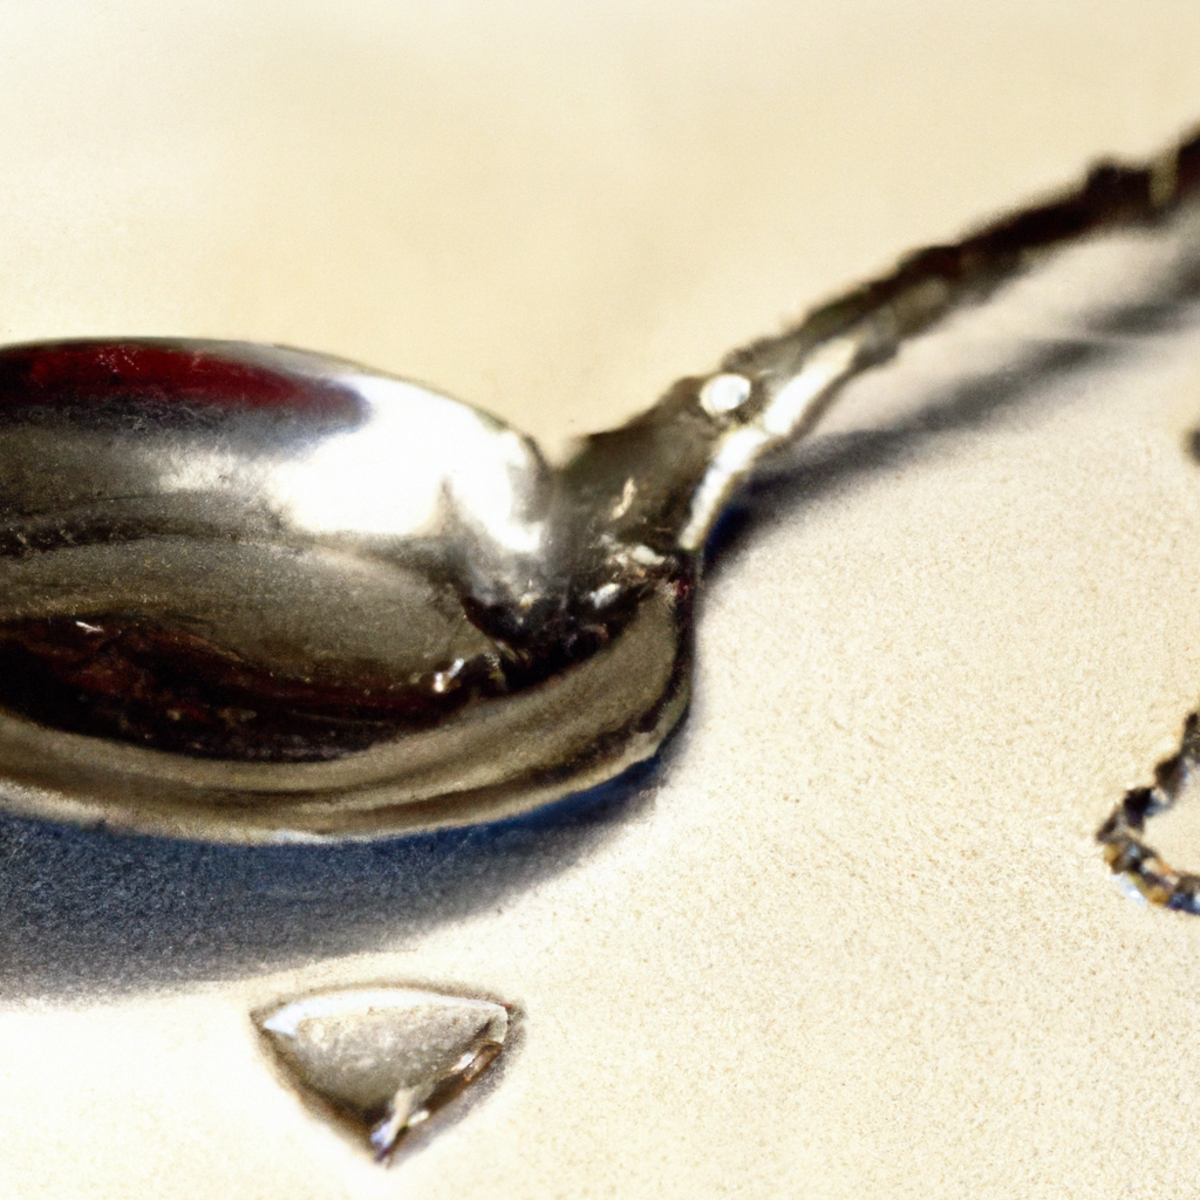 Close-up photo of a tarnished silver spoon and reflective silver jewelry, showcasing the aesthetic qualities of silver.